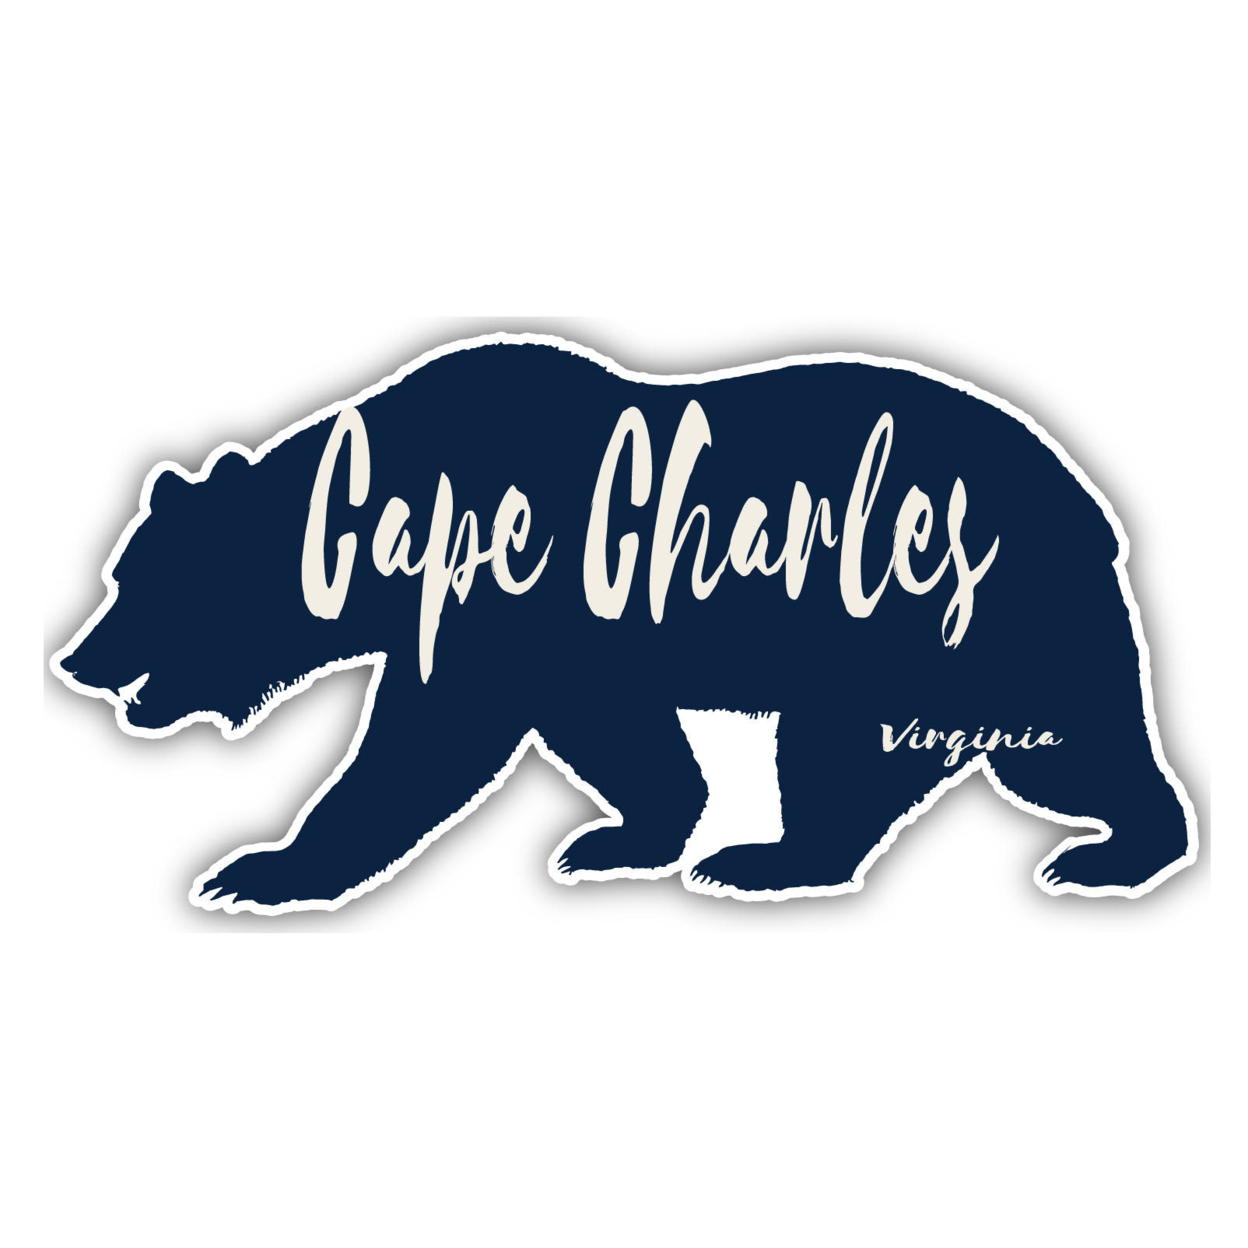 Cape Charles Virginia Souvenir Decorative Stickers (Choose Theme And Size) - 4-Pack, 8-Inch, Bear